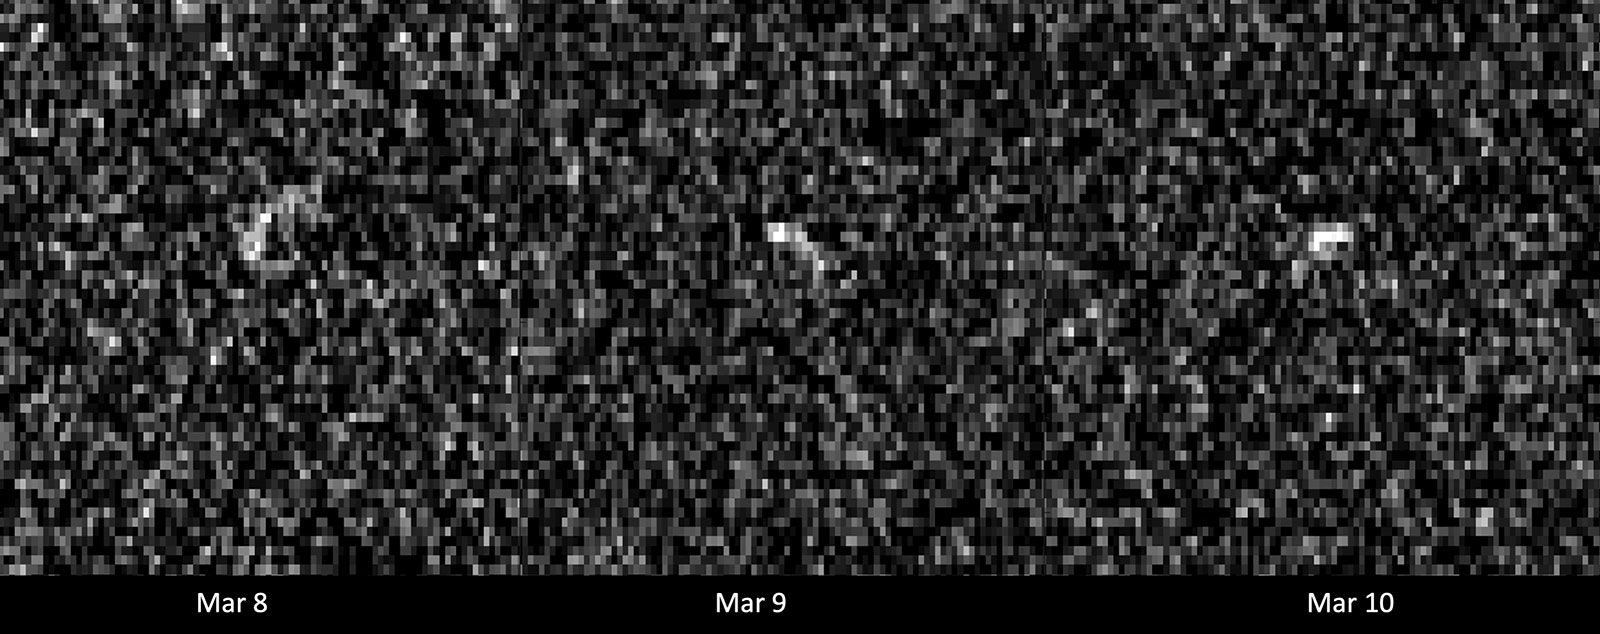 These images of asteroid Apophis were recorded by radio antennas at the Deep Space Network’s Goldstone complex in California and the Green Bank Telescope in West Virginia. The asteroid was 10.6 million miles (17 million kilometers) away